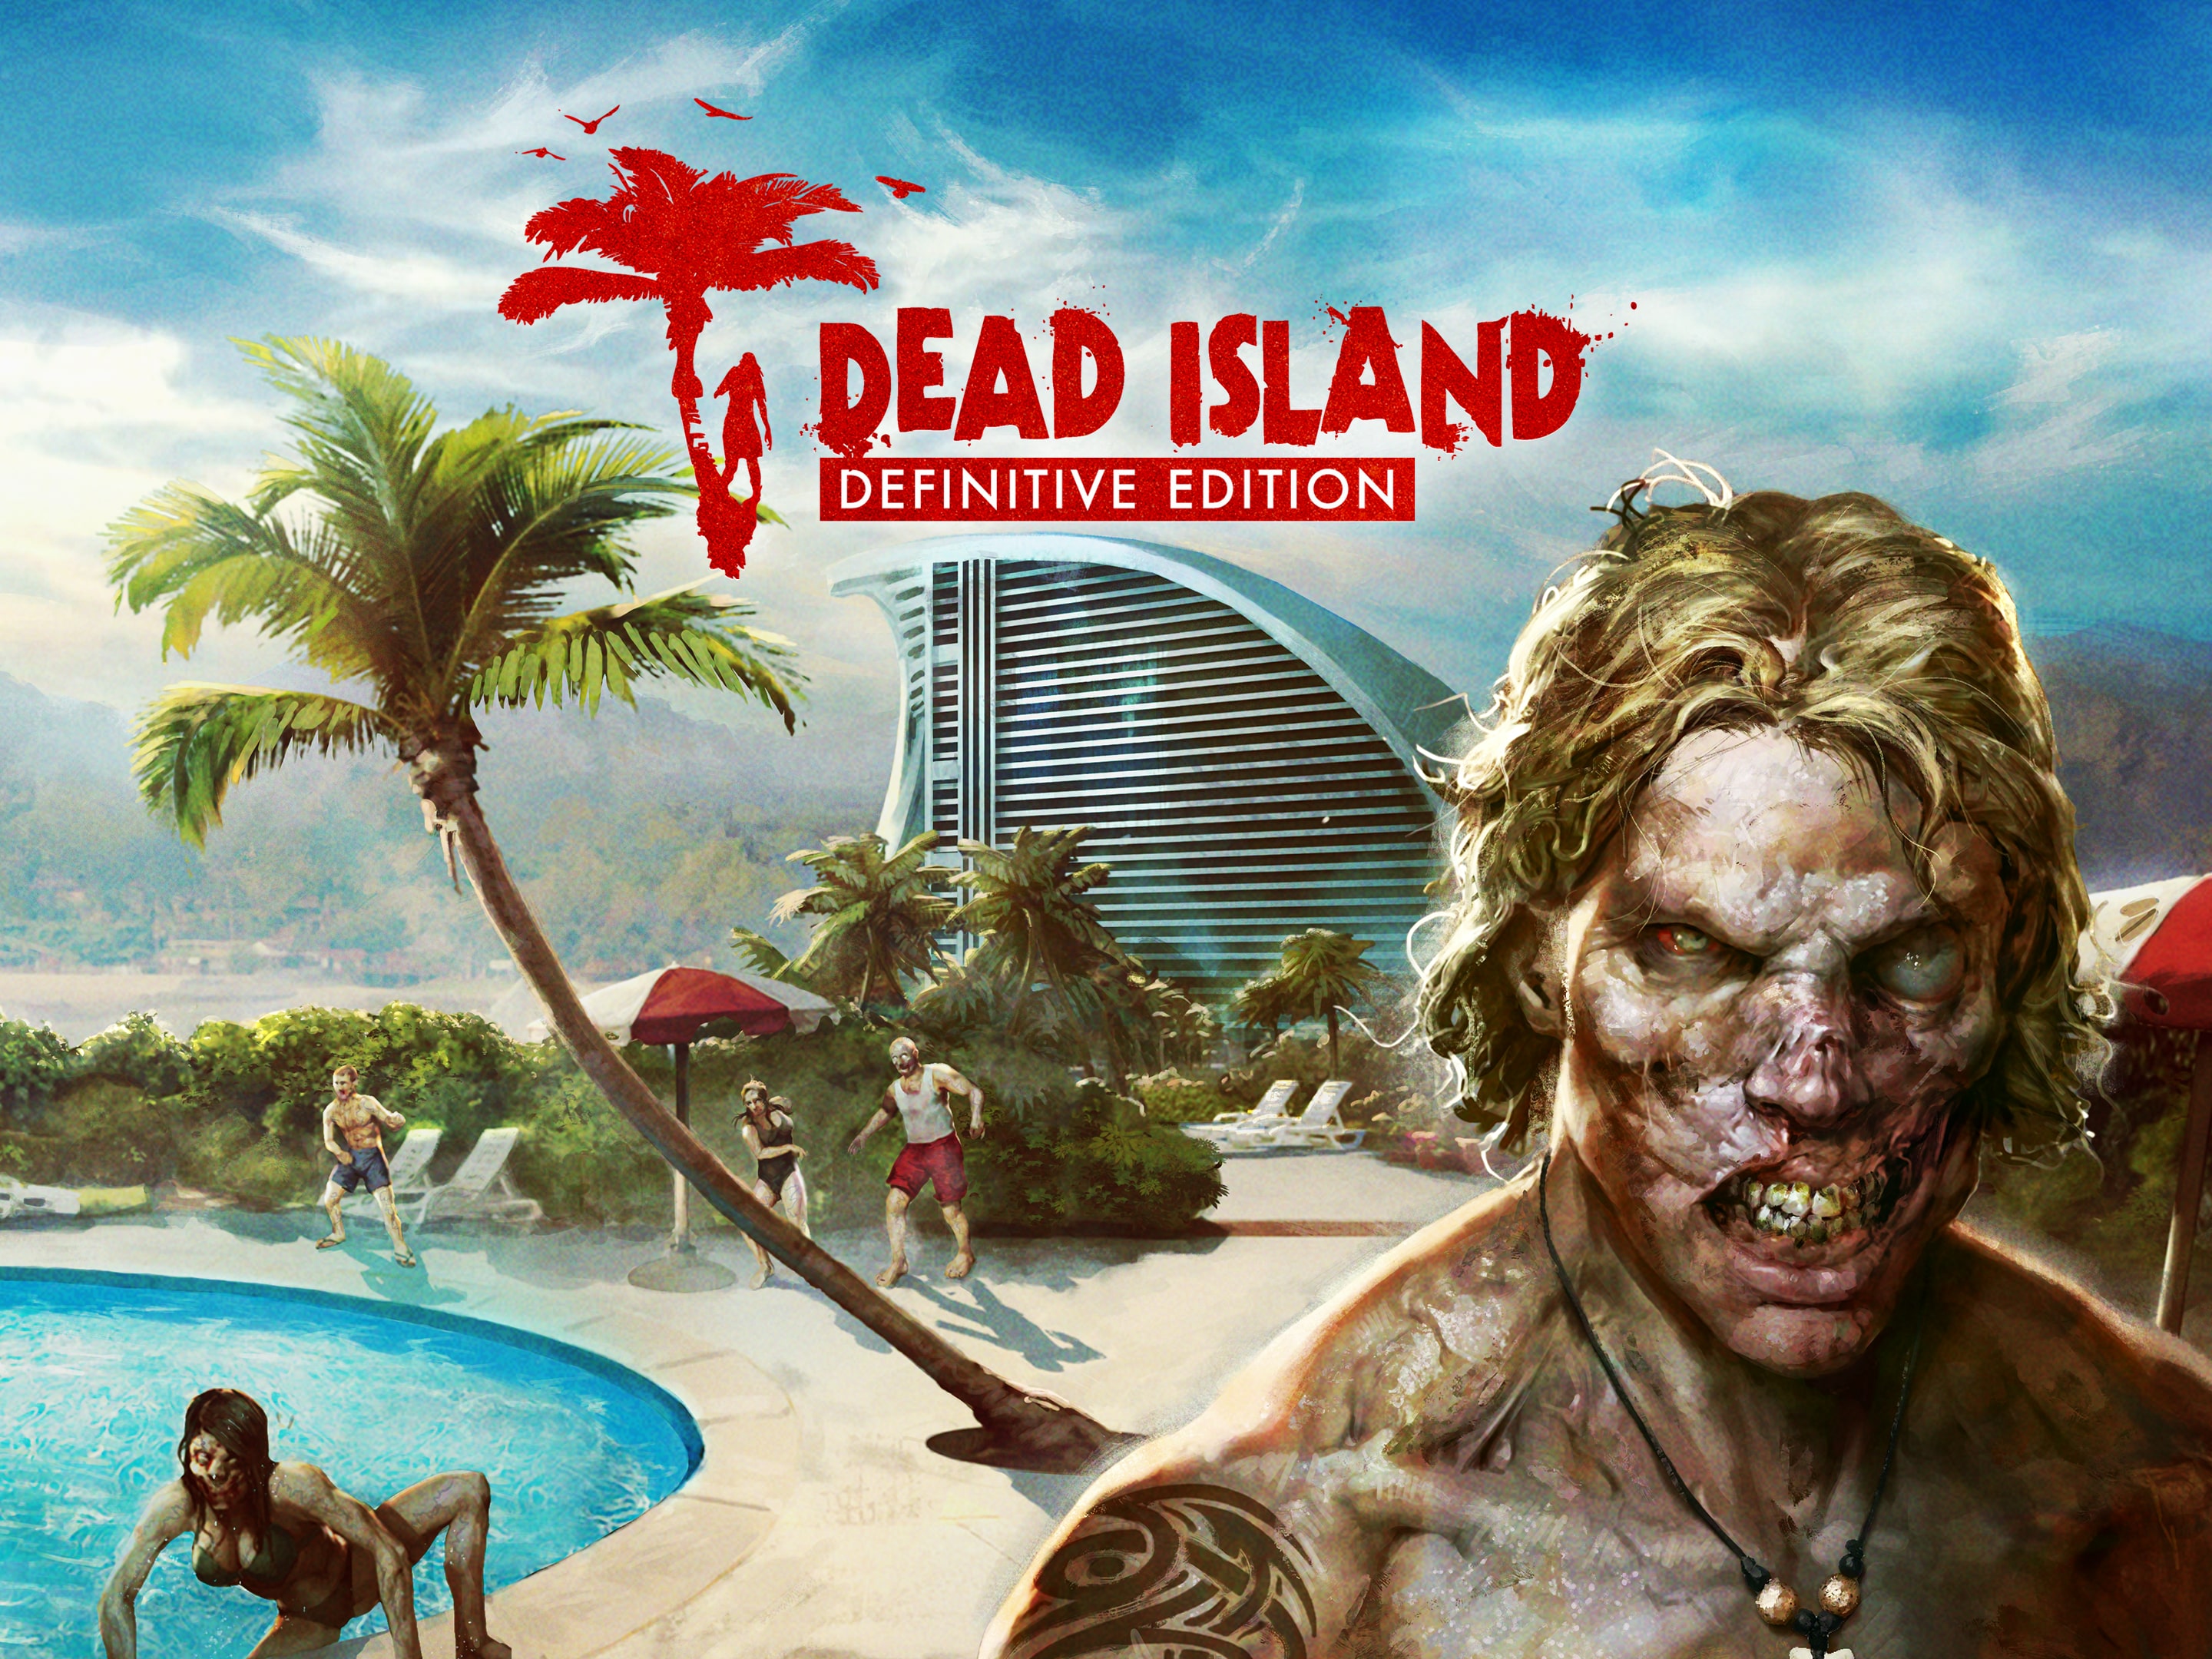 Dead Island Definitive Collection Square Enix PlayStation 4 816819013410 